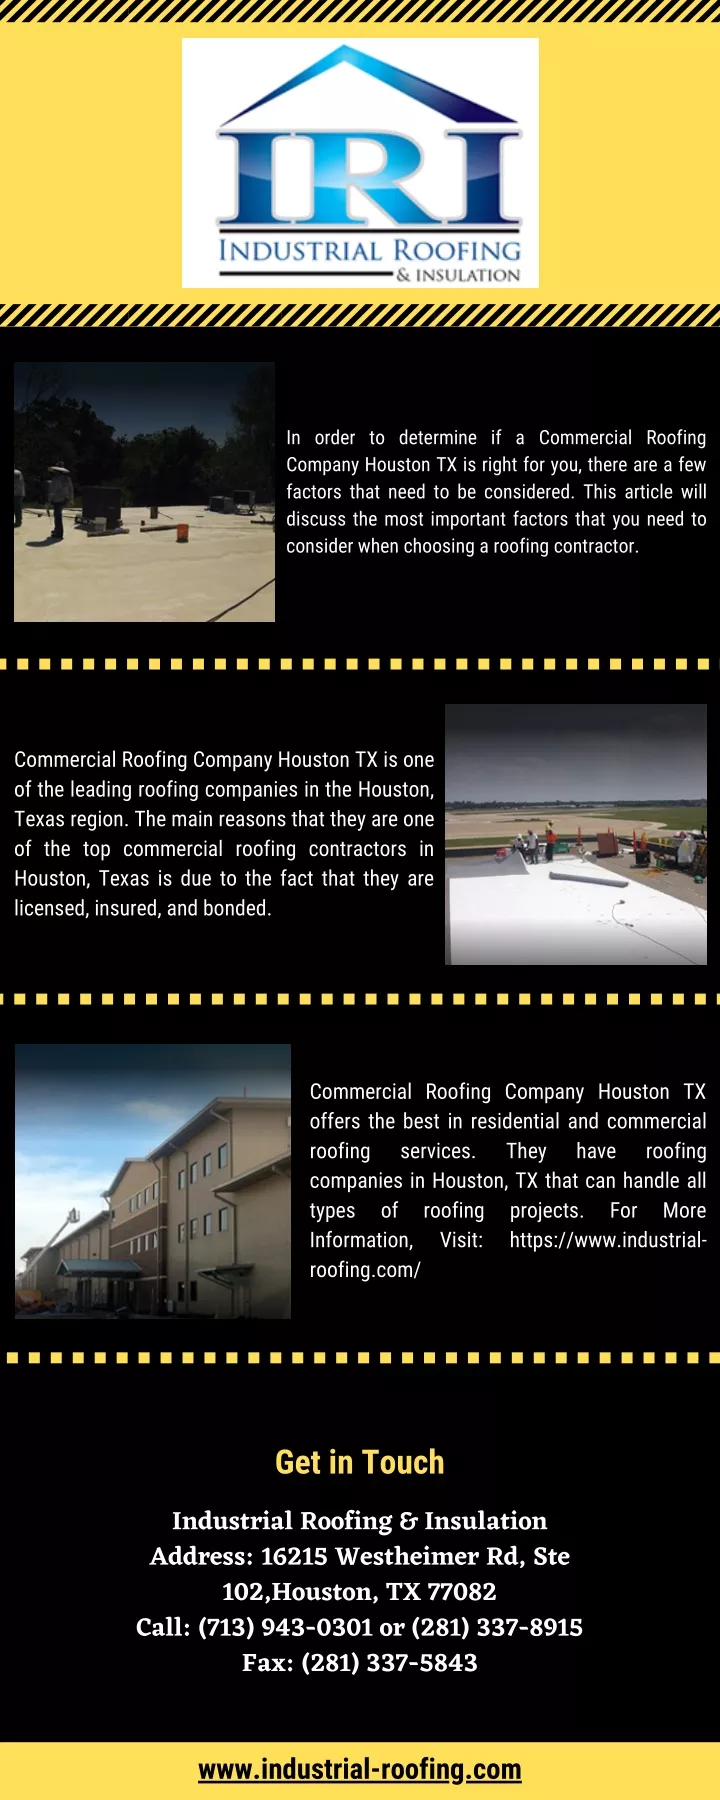 in order to determine if a commercial roofing